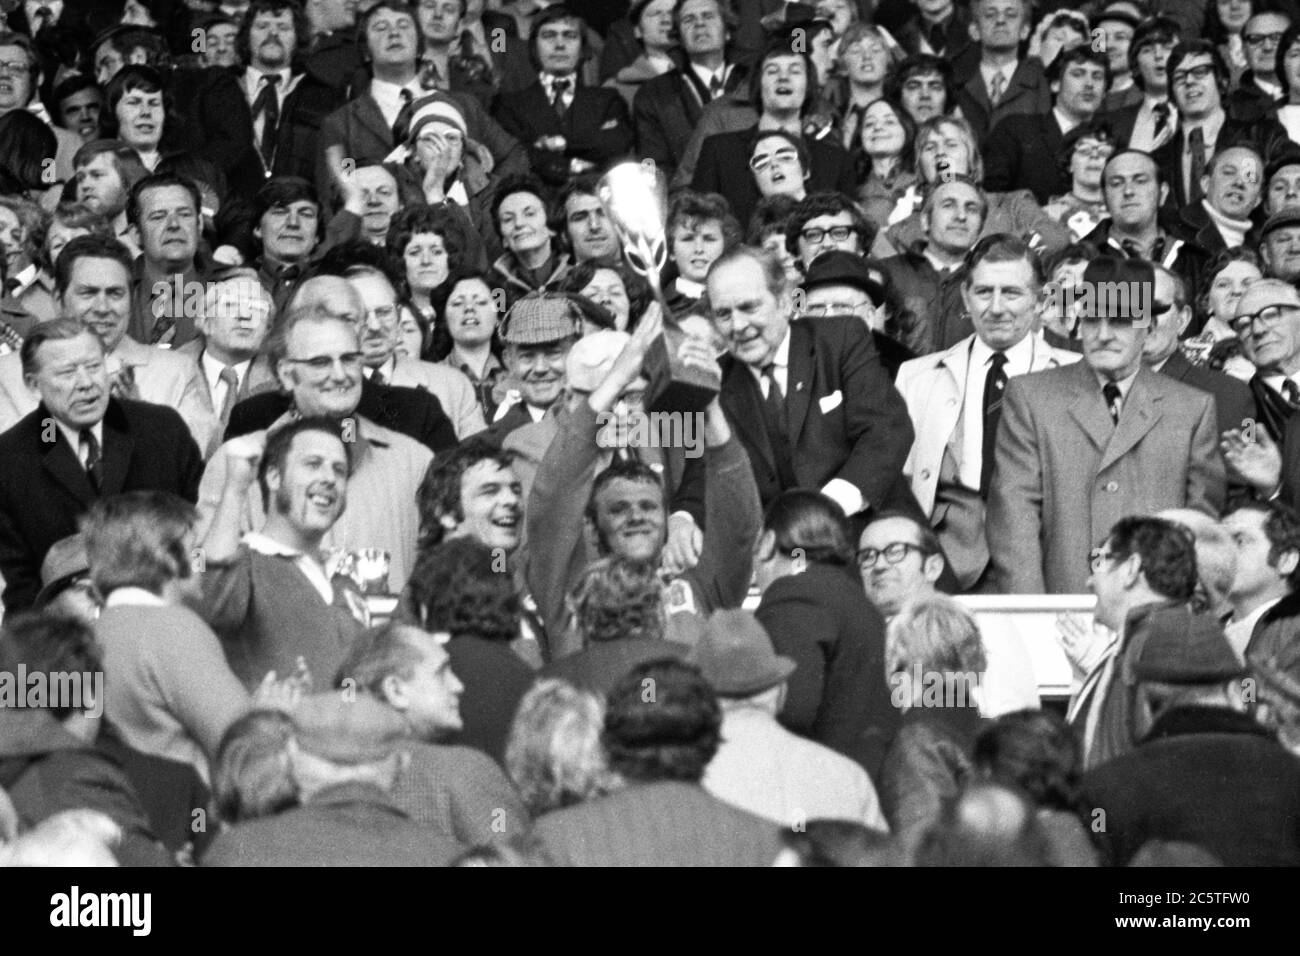 Llanelli captain Roy 'Shunto' Thomas holds the WRU Cup aloft after Llanelli defeated Aberavon by 12-10 in the WRU Cup Final held at the National Stadium, Cardiff on 27 April 1974. Stock Photo